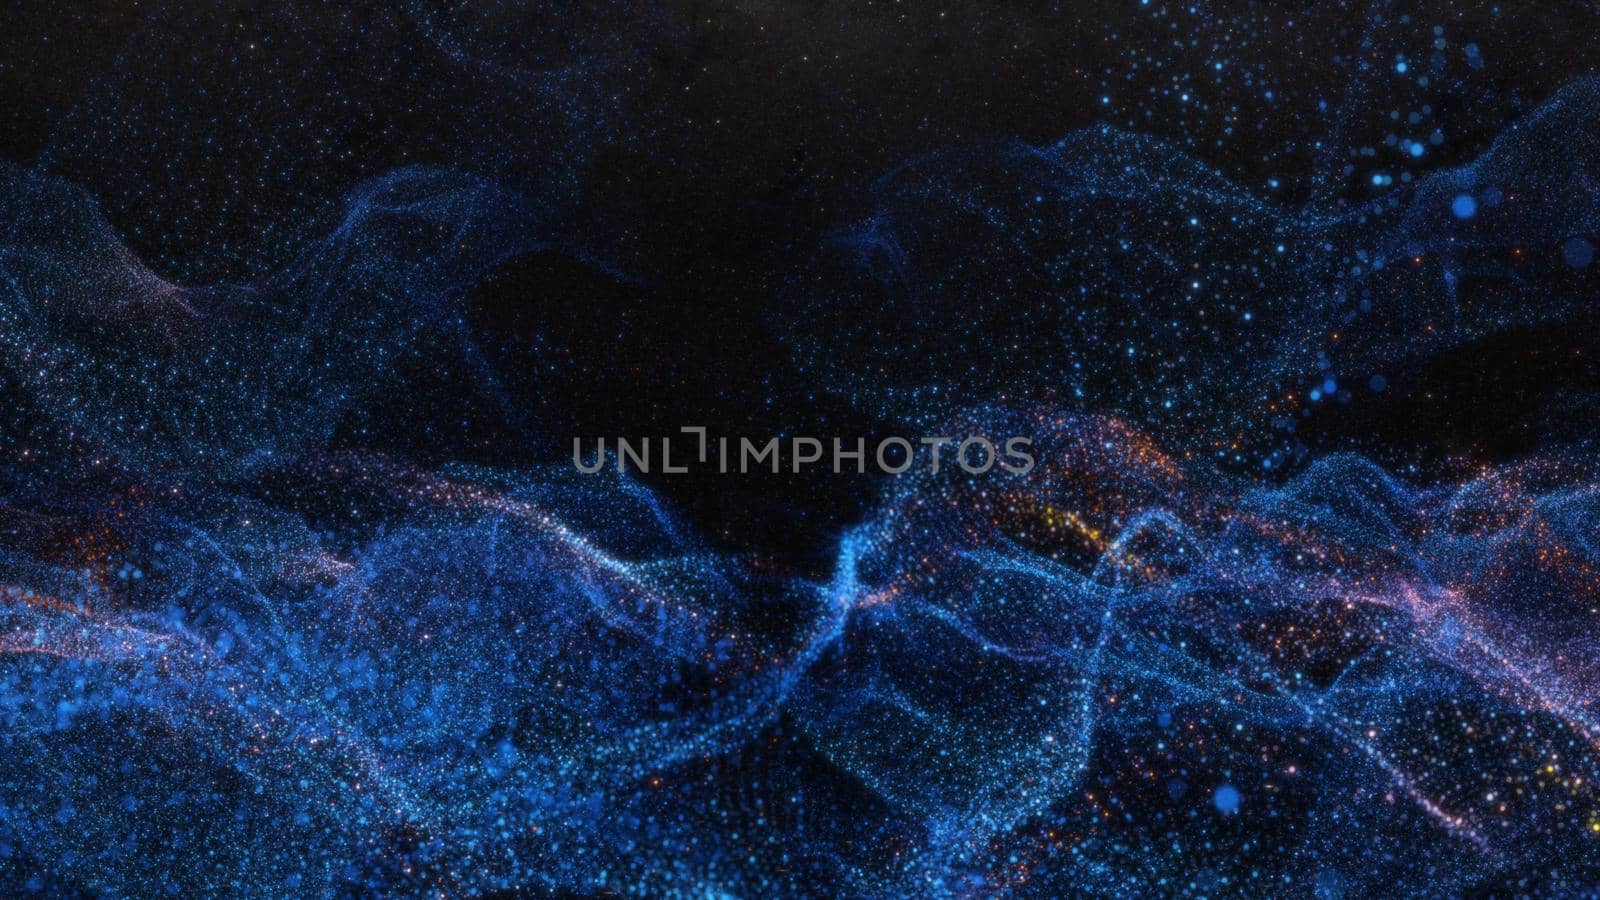 Abstract particle waves with depth of field effect. Futuristic 3d illustration. Technology concept. Cyber UI, HUD element